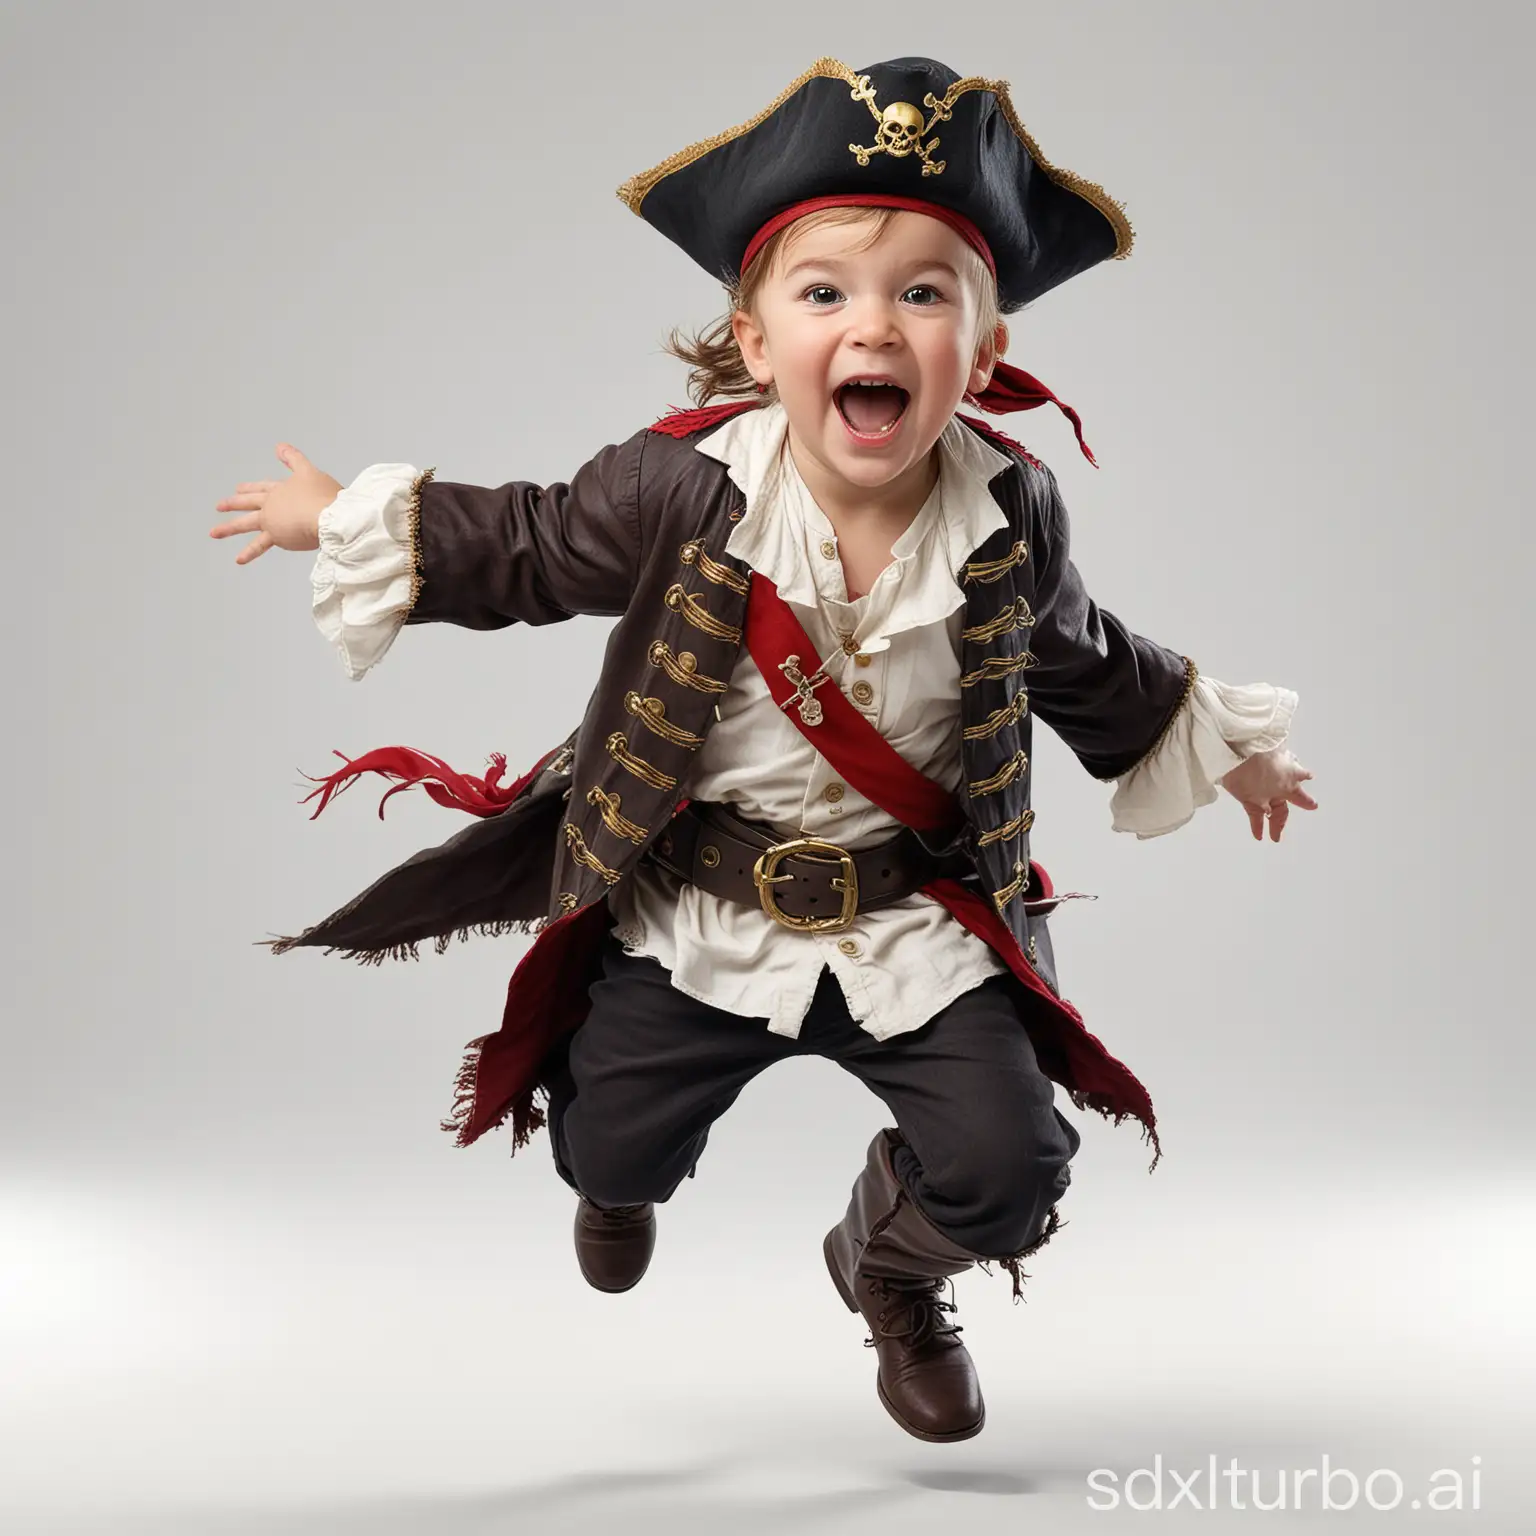 cute kid, dressed as a pirate, happy and having a good time, cute, jumping in the air excited on a plain white background. This is a full body photo realistic high resolution image with sharp clean subject focus